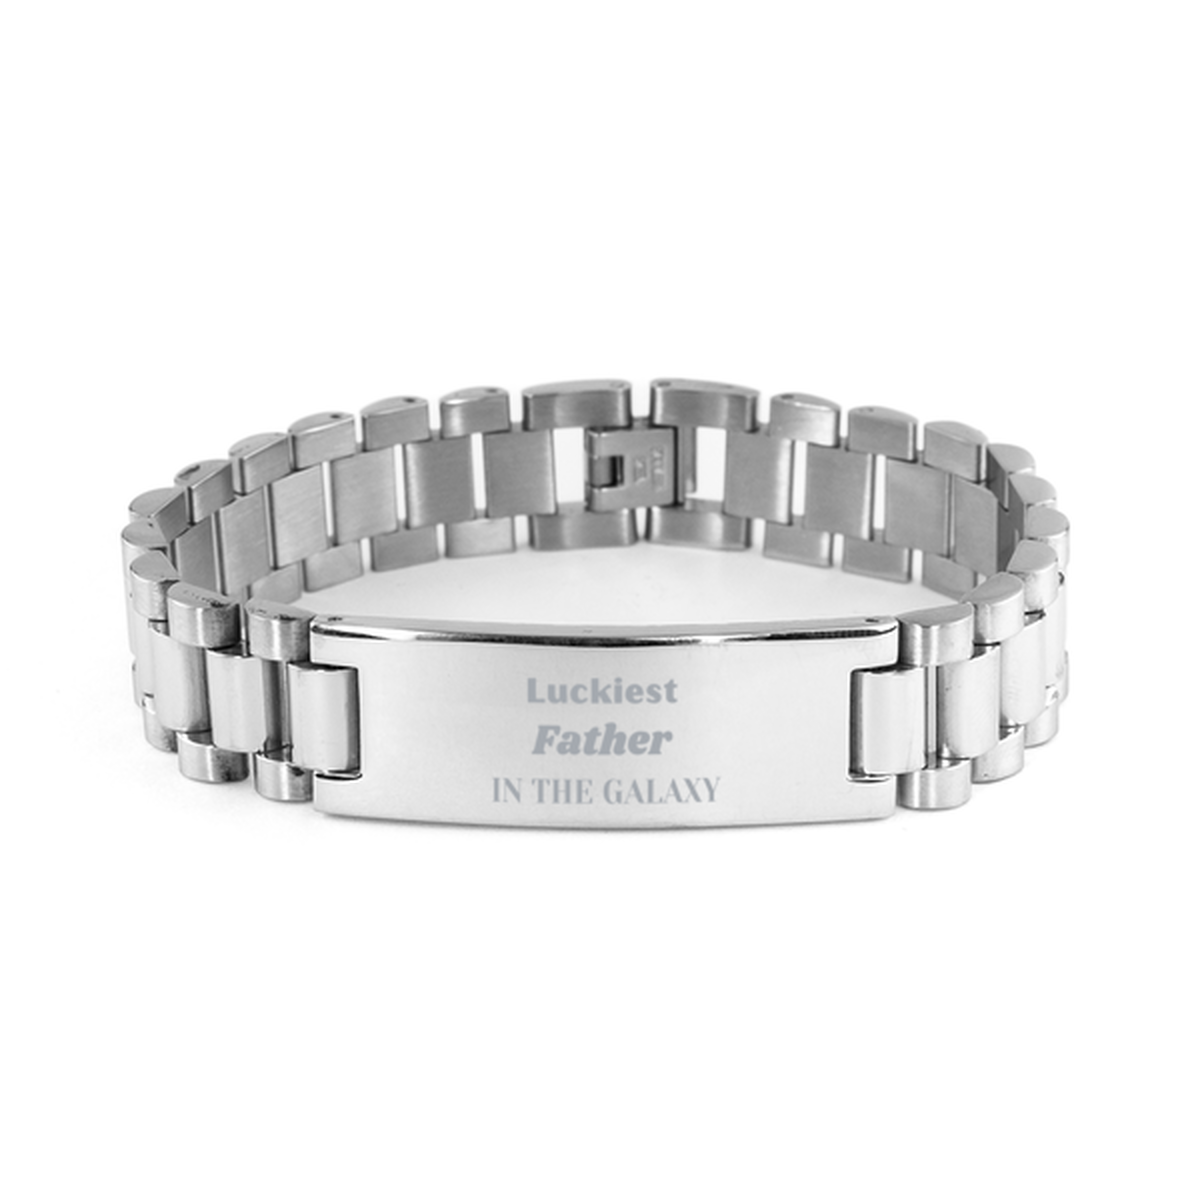 Luckiest Father in the Galaxy, To My Father Engraved Gifts, Christmas Father Ladder Stainless Steel Bracelet Gifts, X-mas Birthday Unique Gifts For Father Men Women